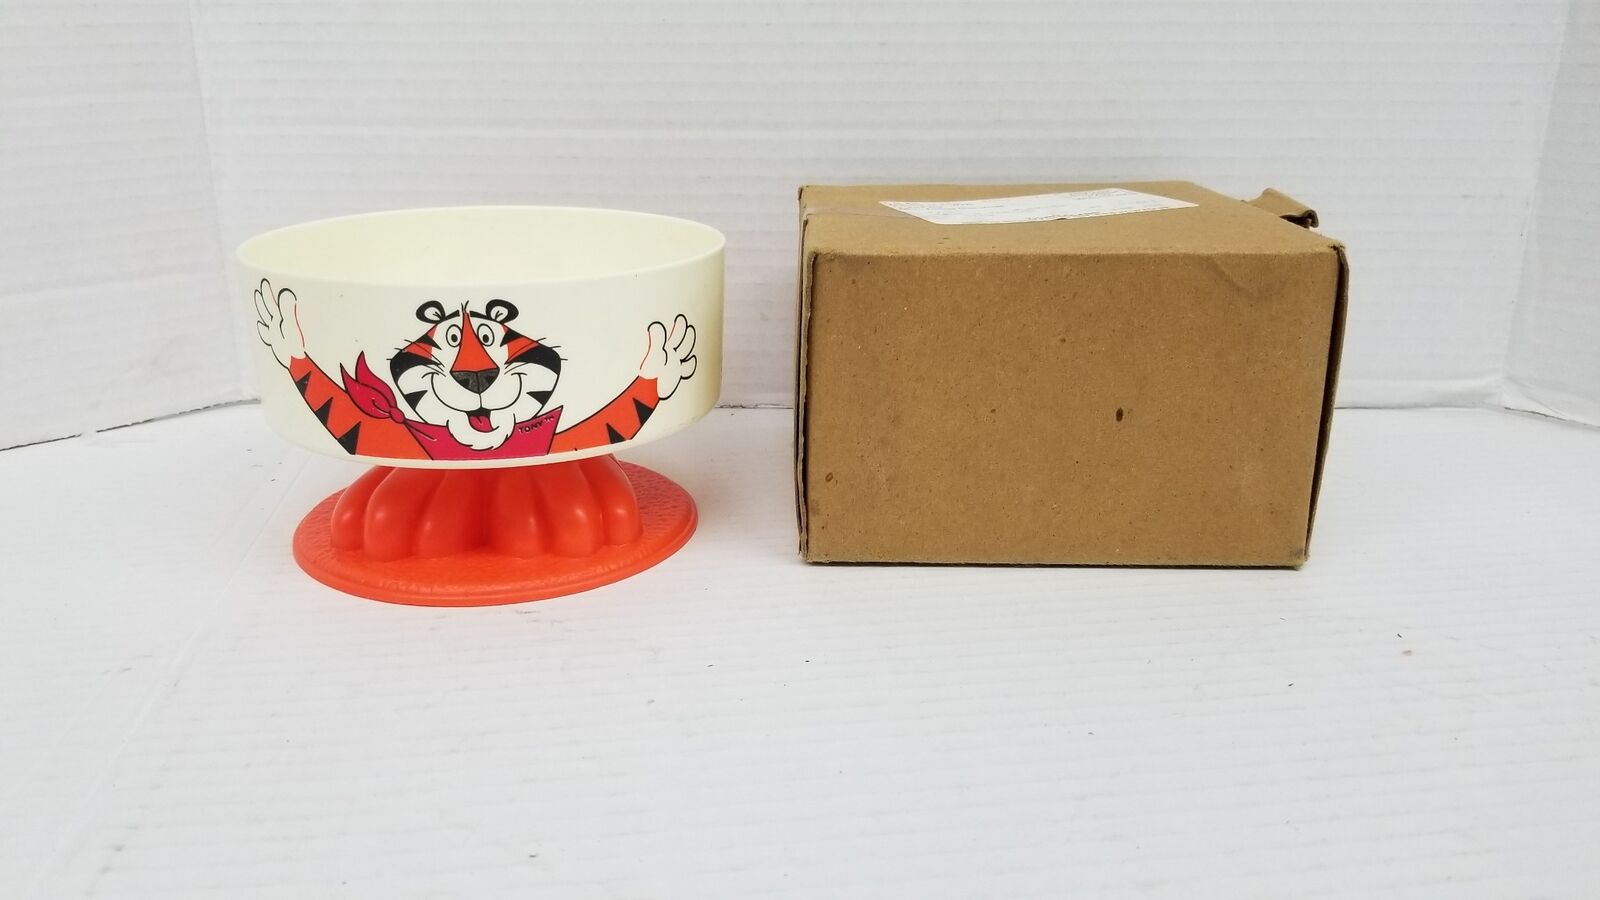 1981 Kellogg's Tony The Tiger Mail Away Footed Cereal Bowl New In Box Shelf B2